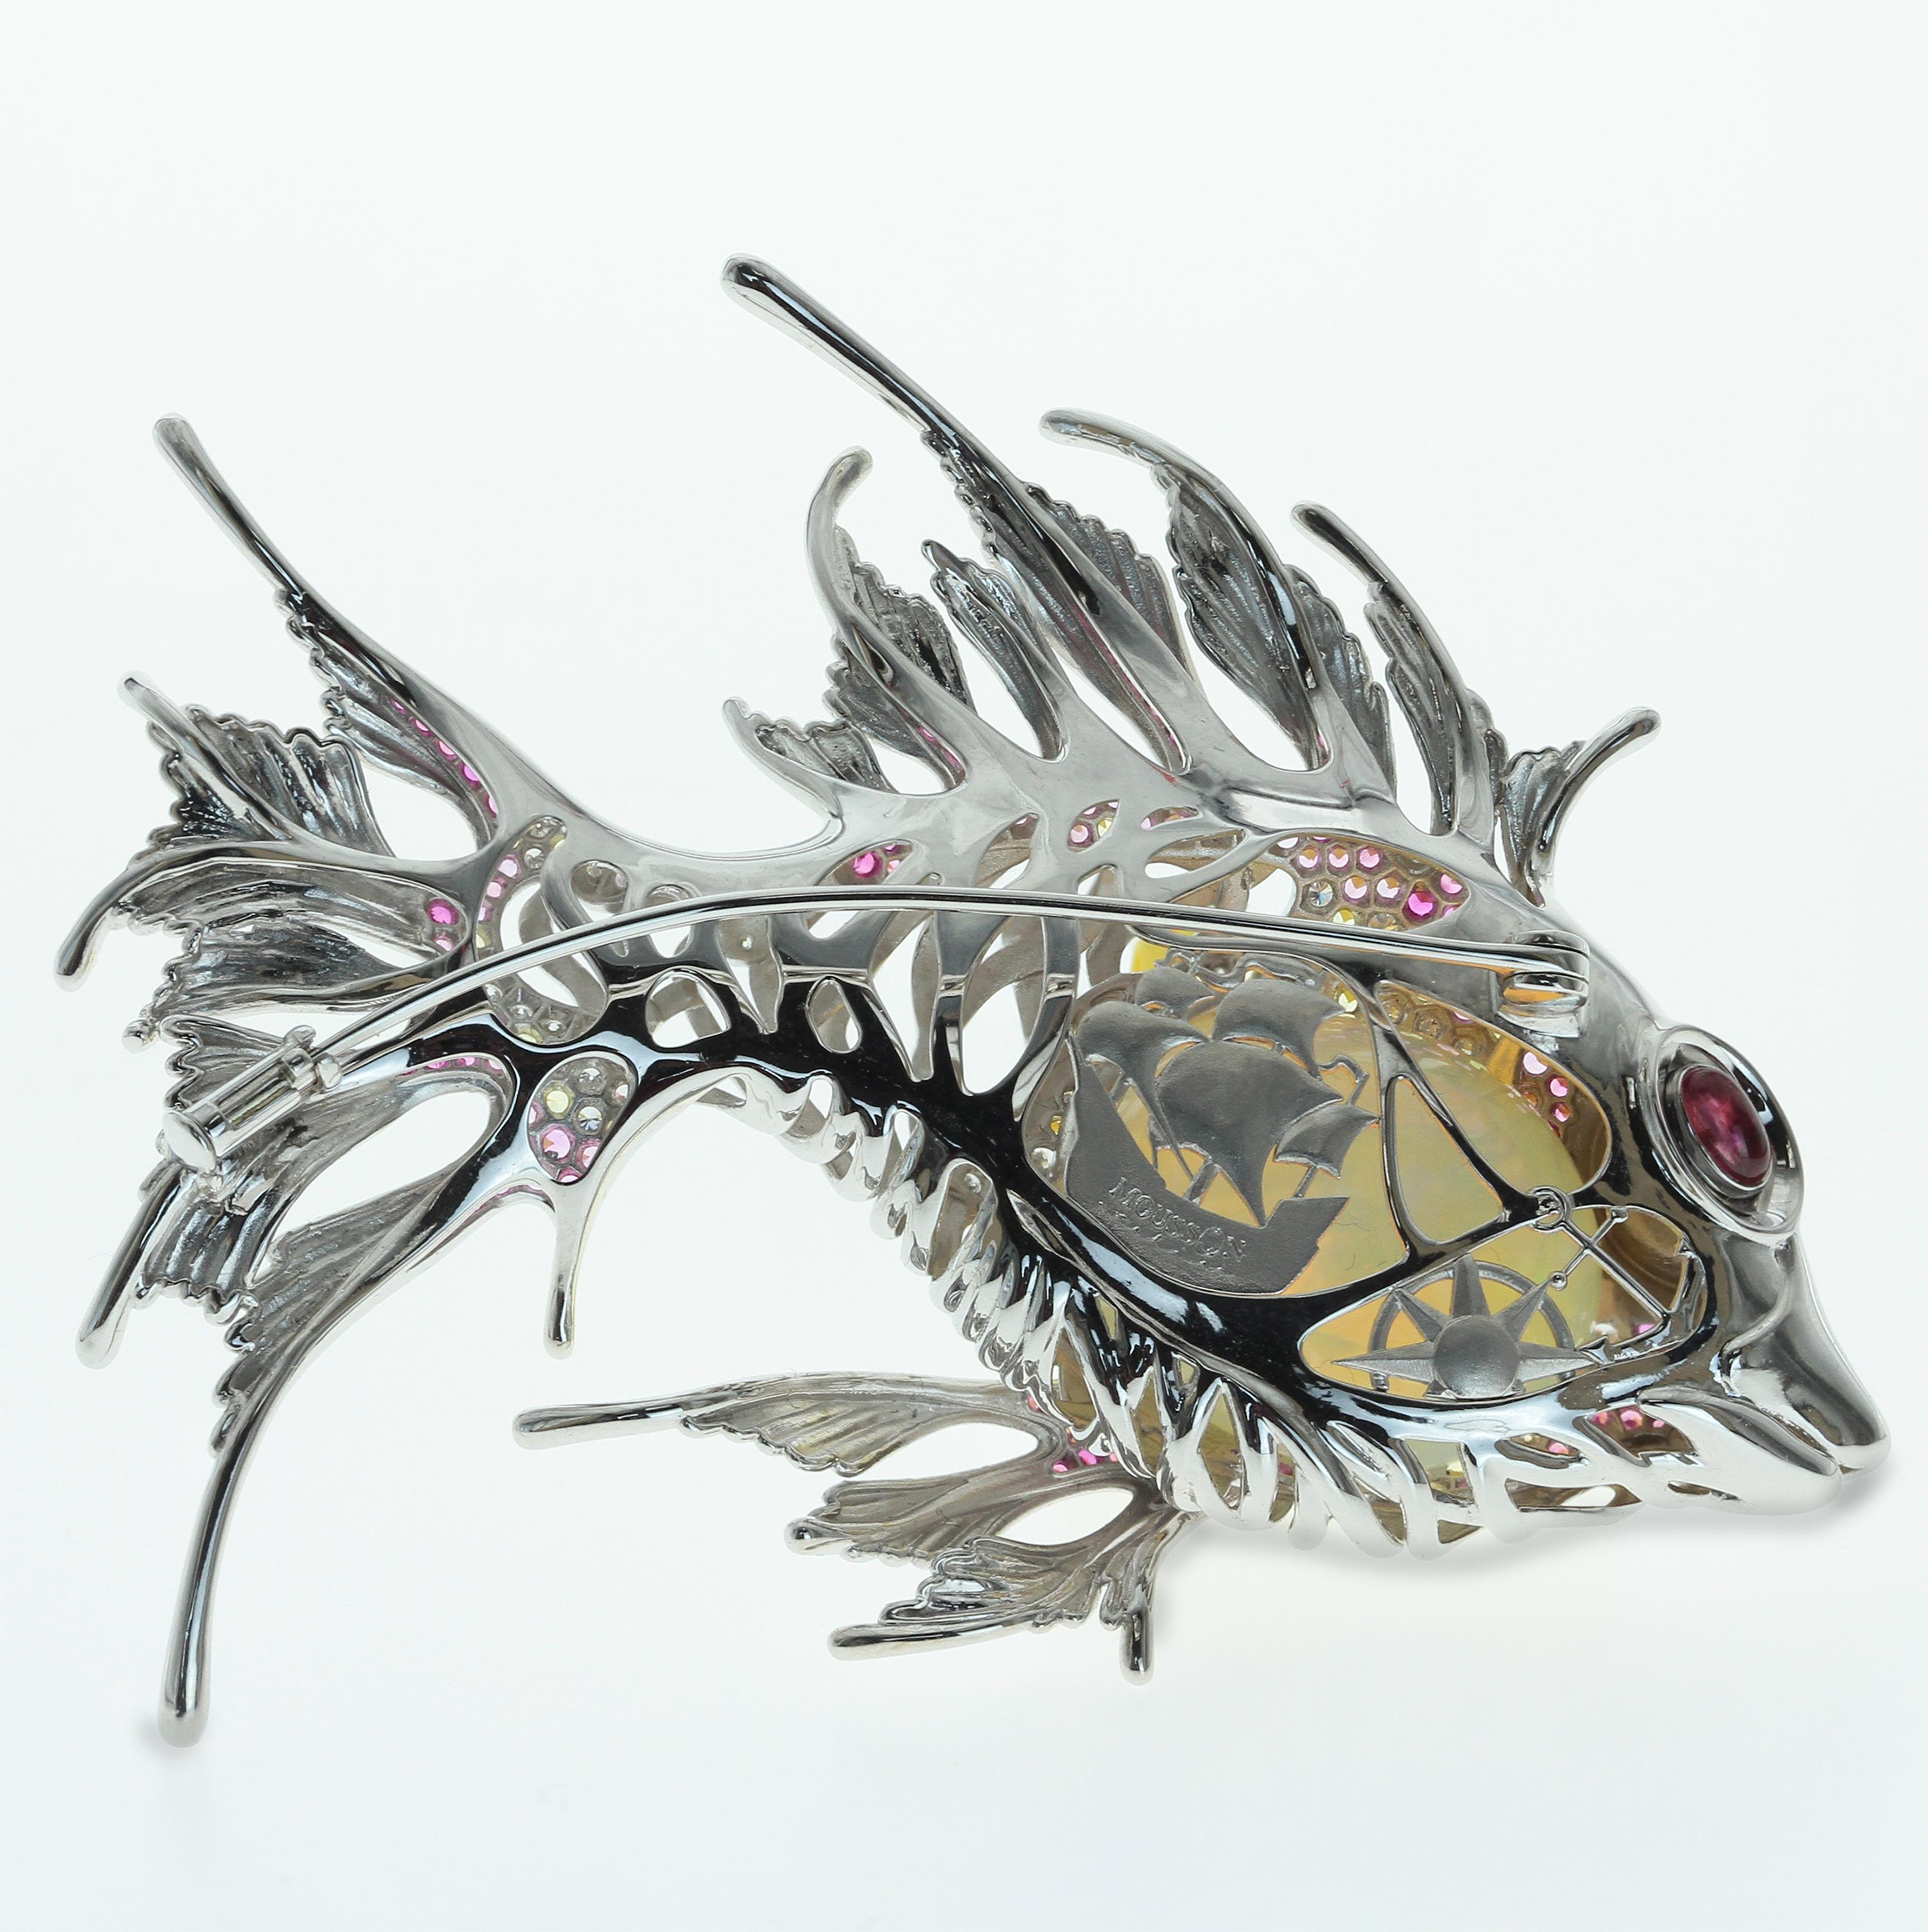 Mousson Atelier represent with prouds!
18 karat white gold Lion fish brooch. The body consists of 23.9 carat Opal, Pink and Yellow Sapphires and approximate 1 carat of Diamonds. Pink Tourmaline cabochon in the eye. High detailing, some secret story